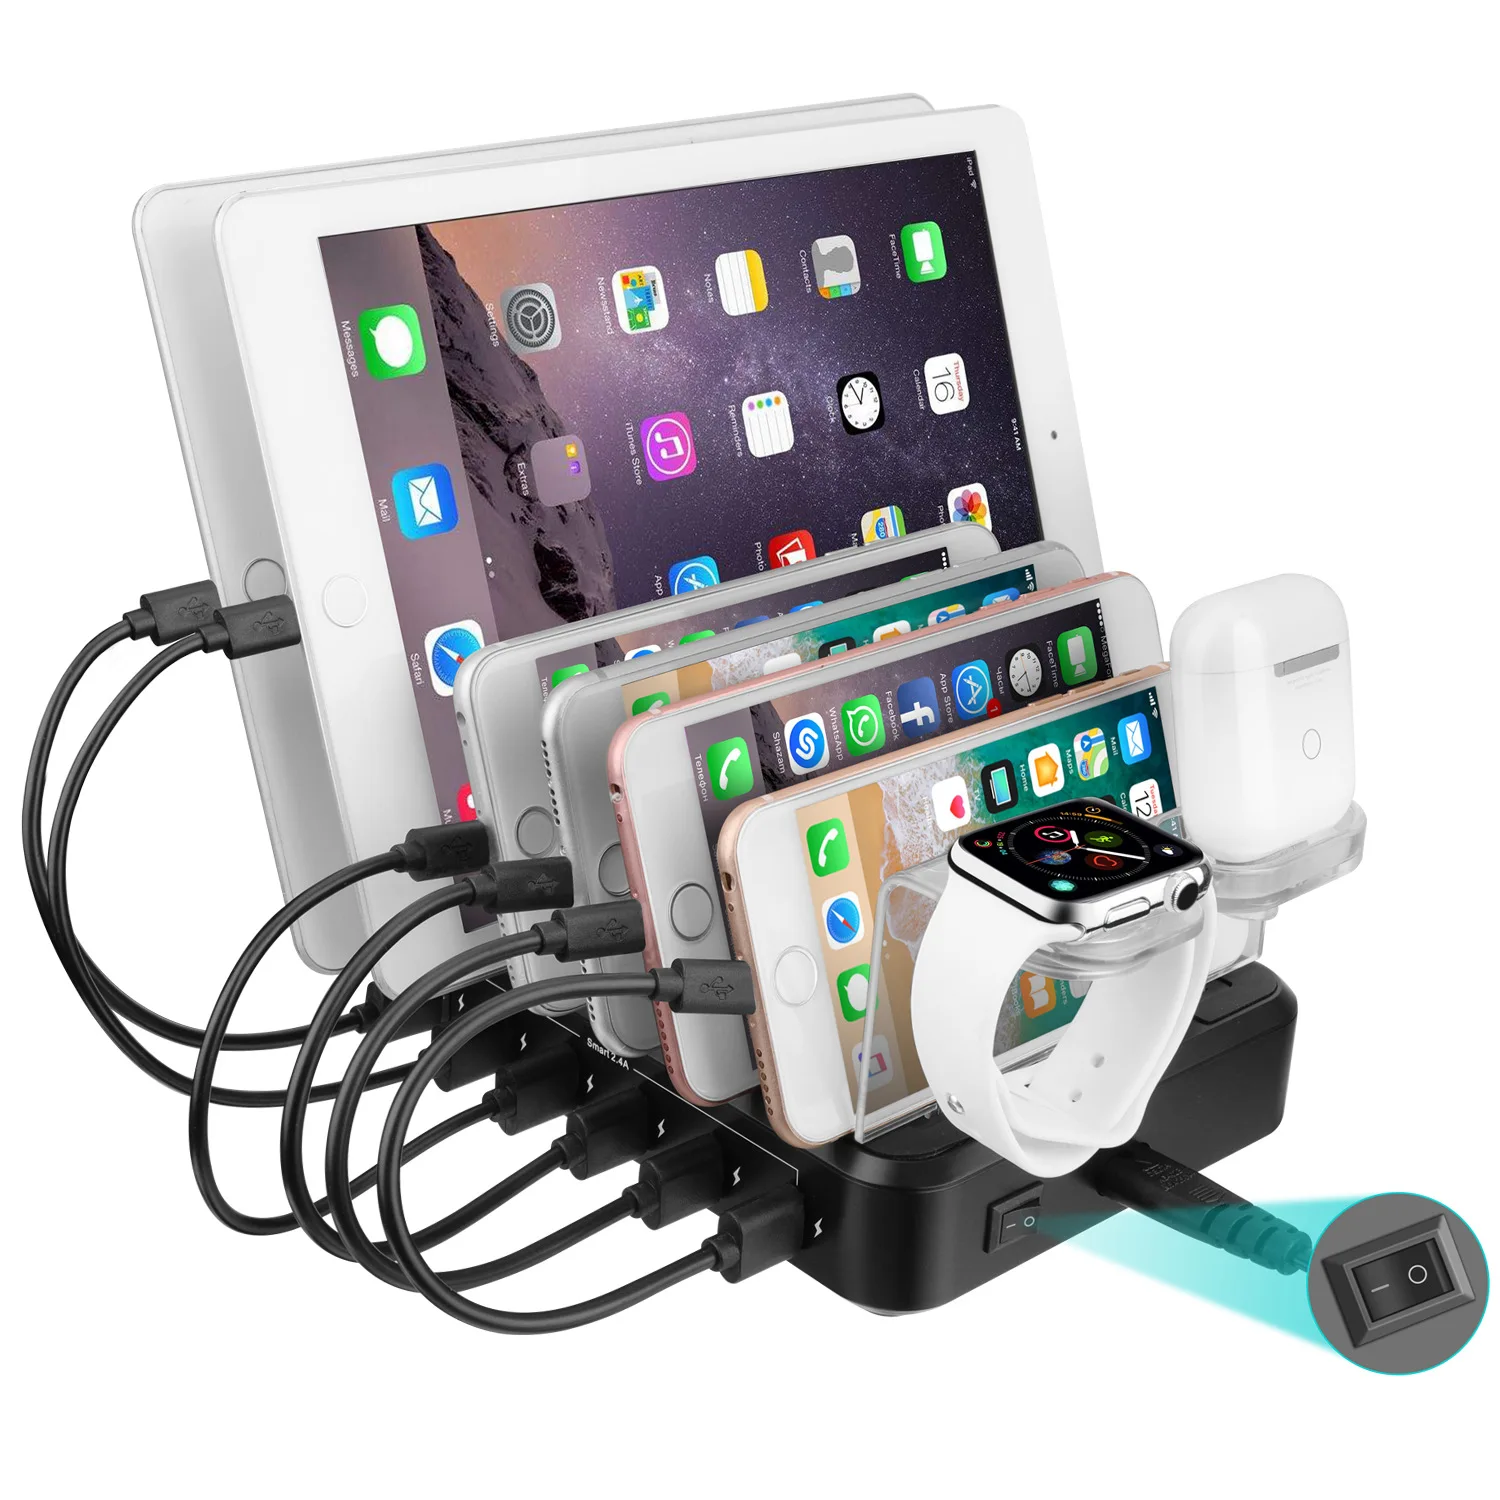 

ILEPO 6-Port USB Charging Station For Home and Office 60W 5V 2.4A USB Charger for Phones Tablets and Other Electronics